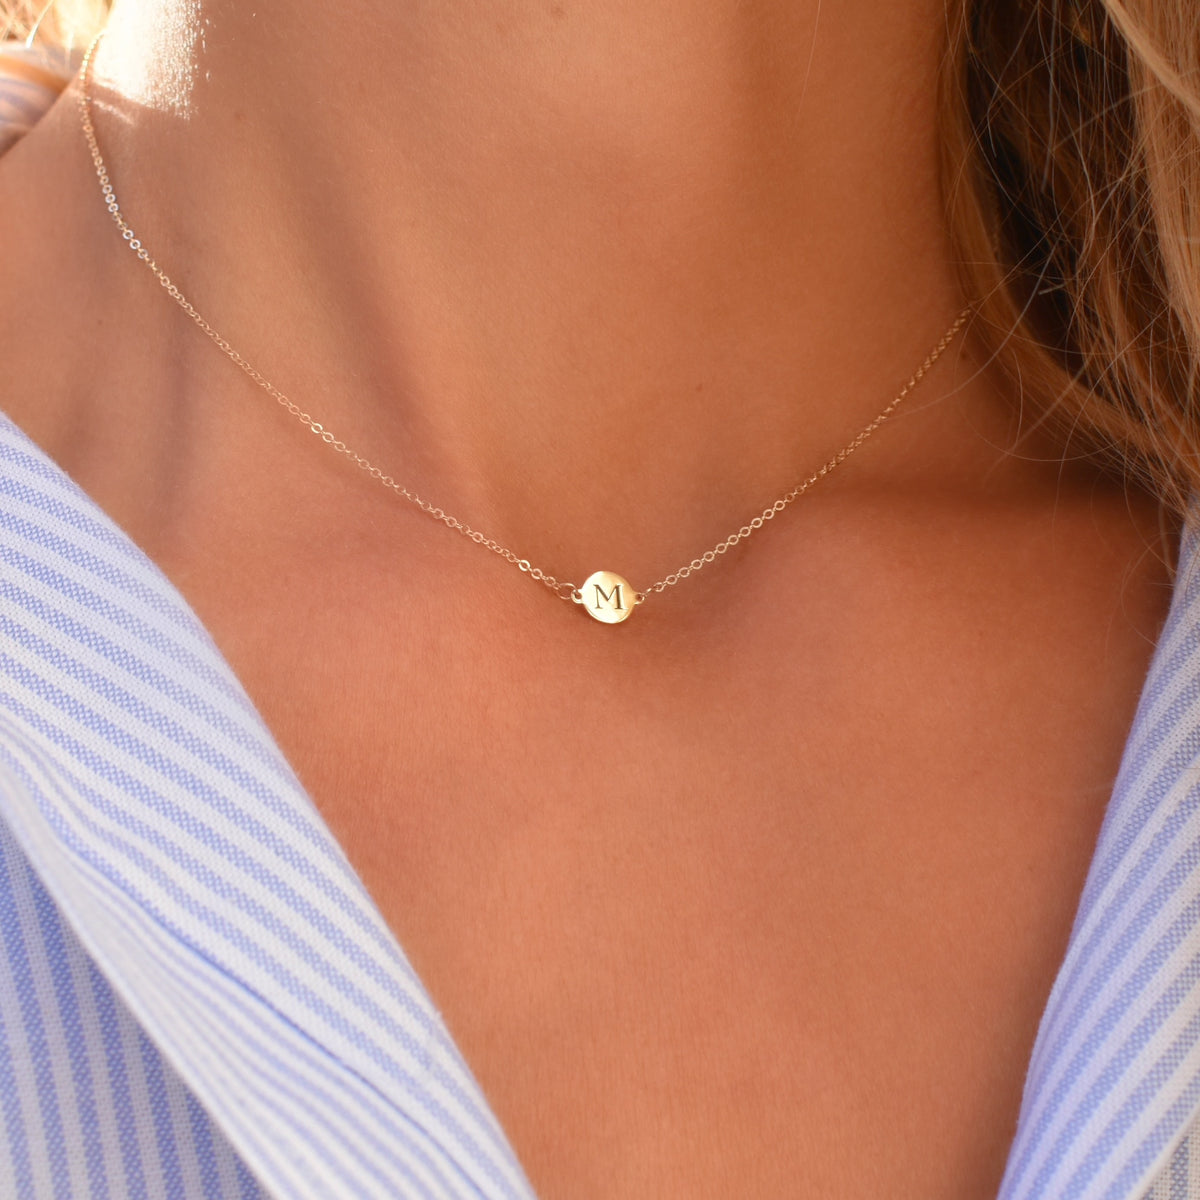 14K SOLID YELLOW GOLD INITIAL NECKLACE, DAINTY LETTER M NECKLACE